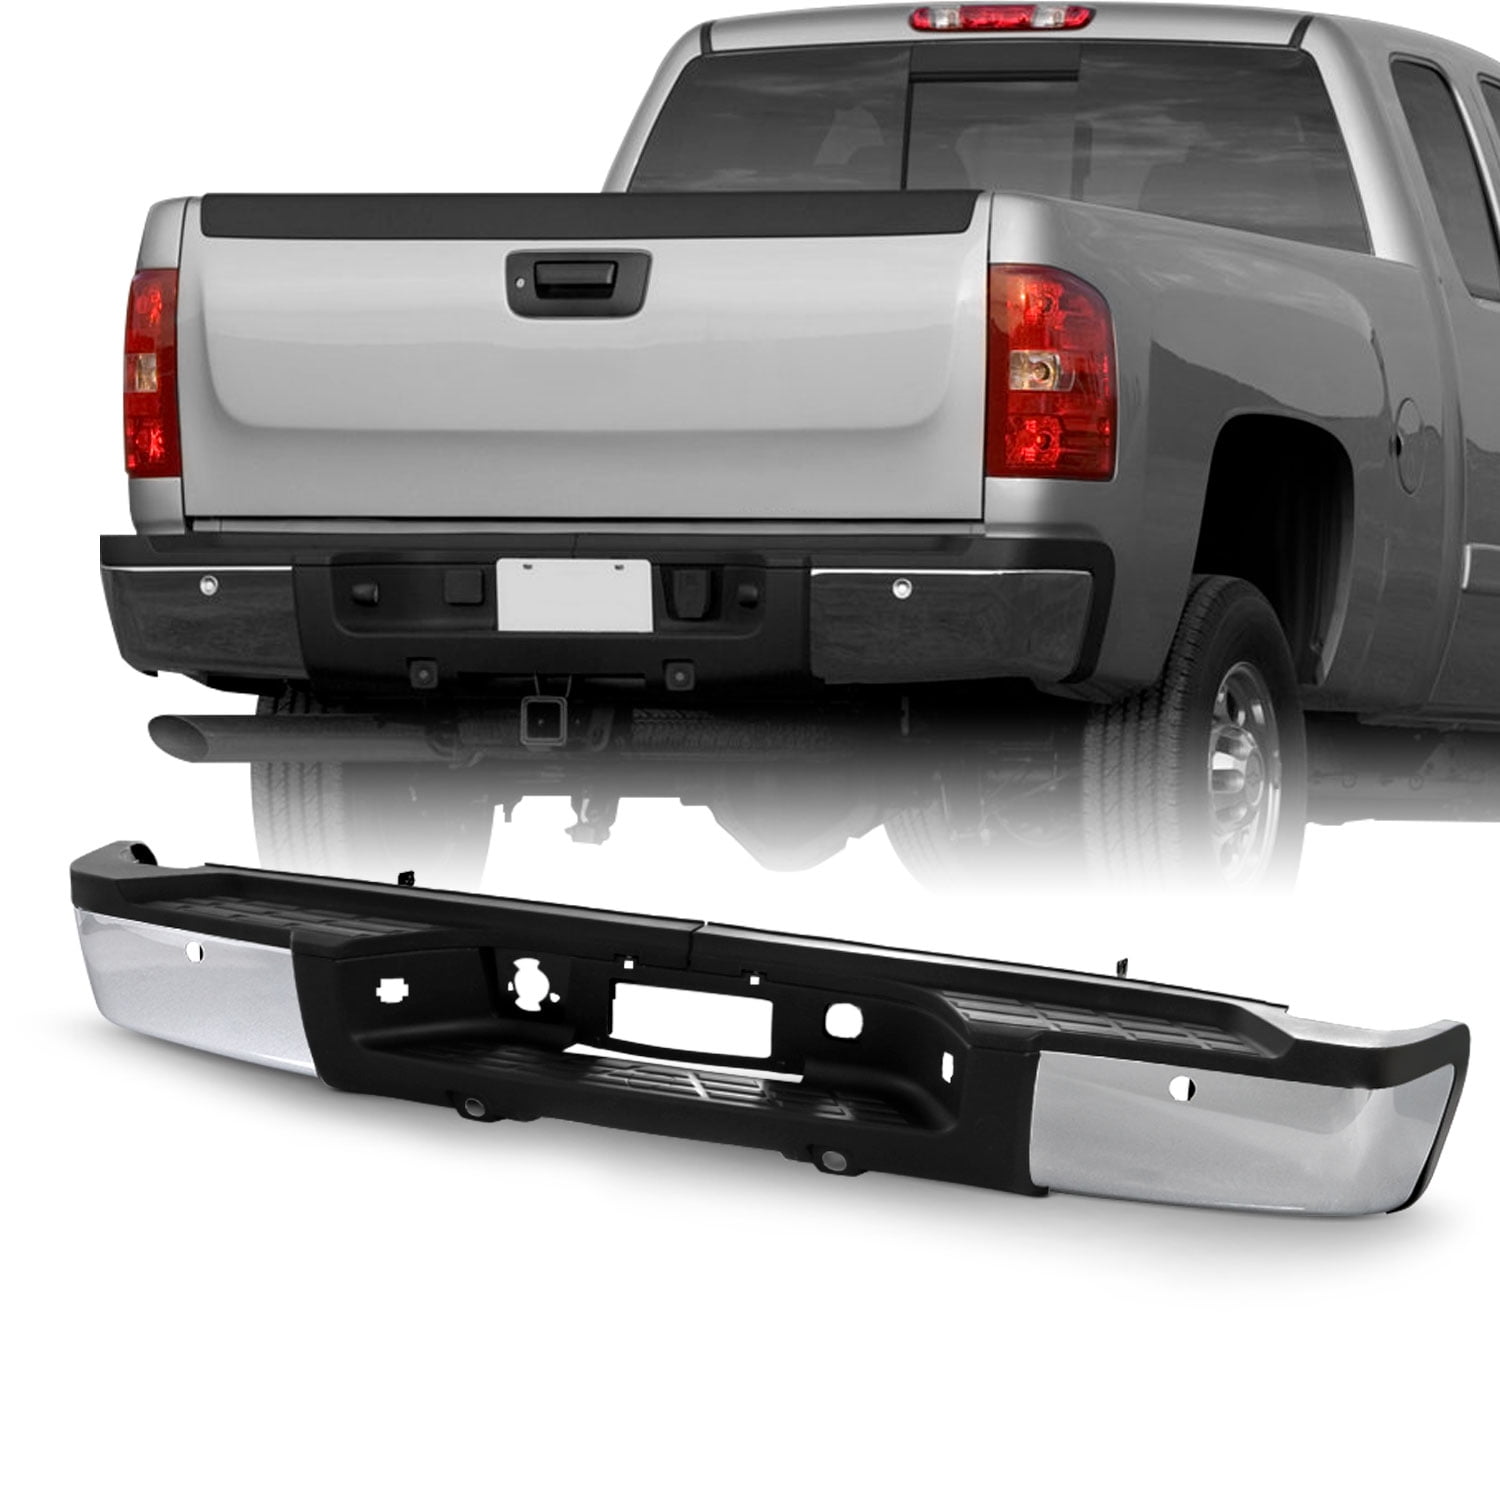 Garage-Pro Step Bumper Compatible with CHEVROLET SILVERADO/SIERRA 2500 HD/3500 HD 2015-2018 Assembly Chrome Single Rear Wheels All Cab Types 